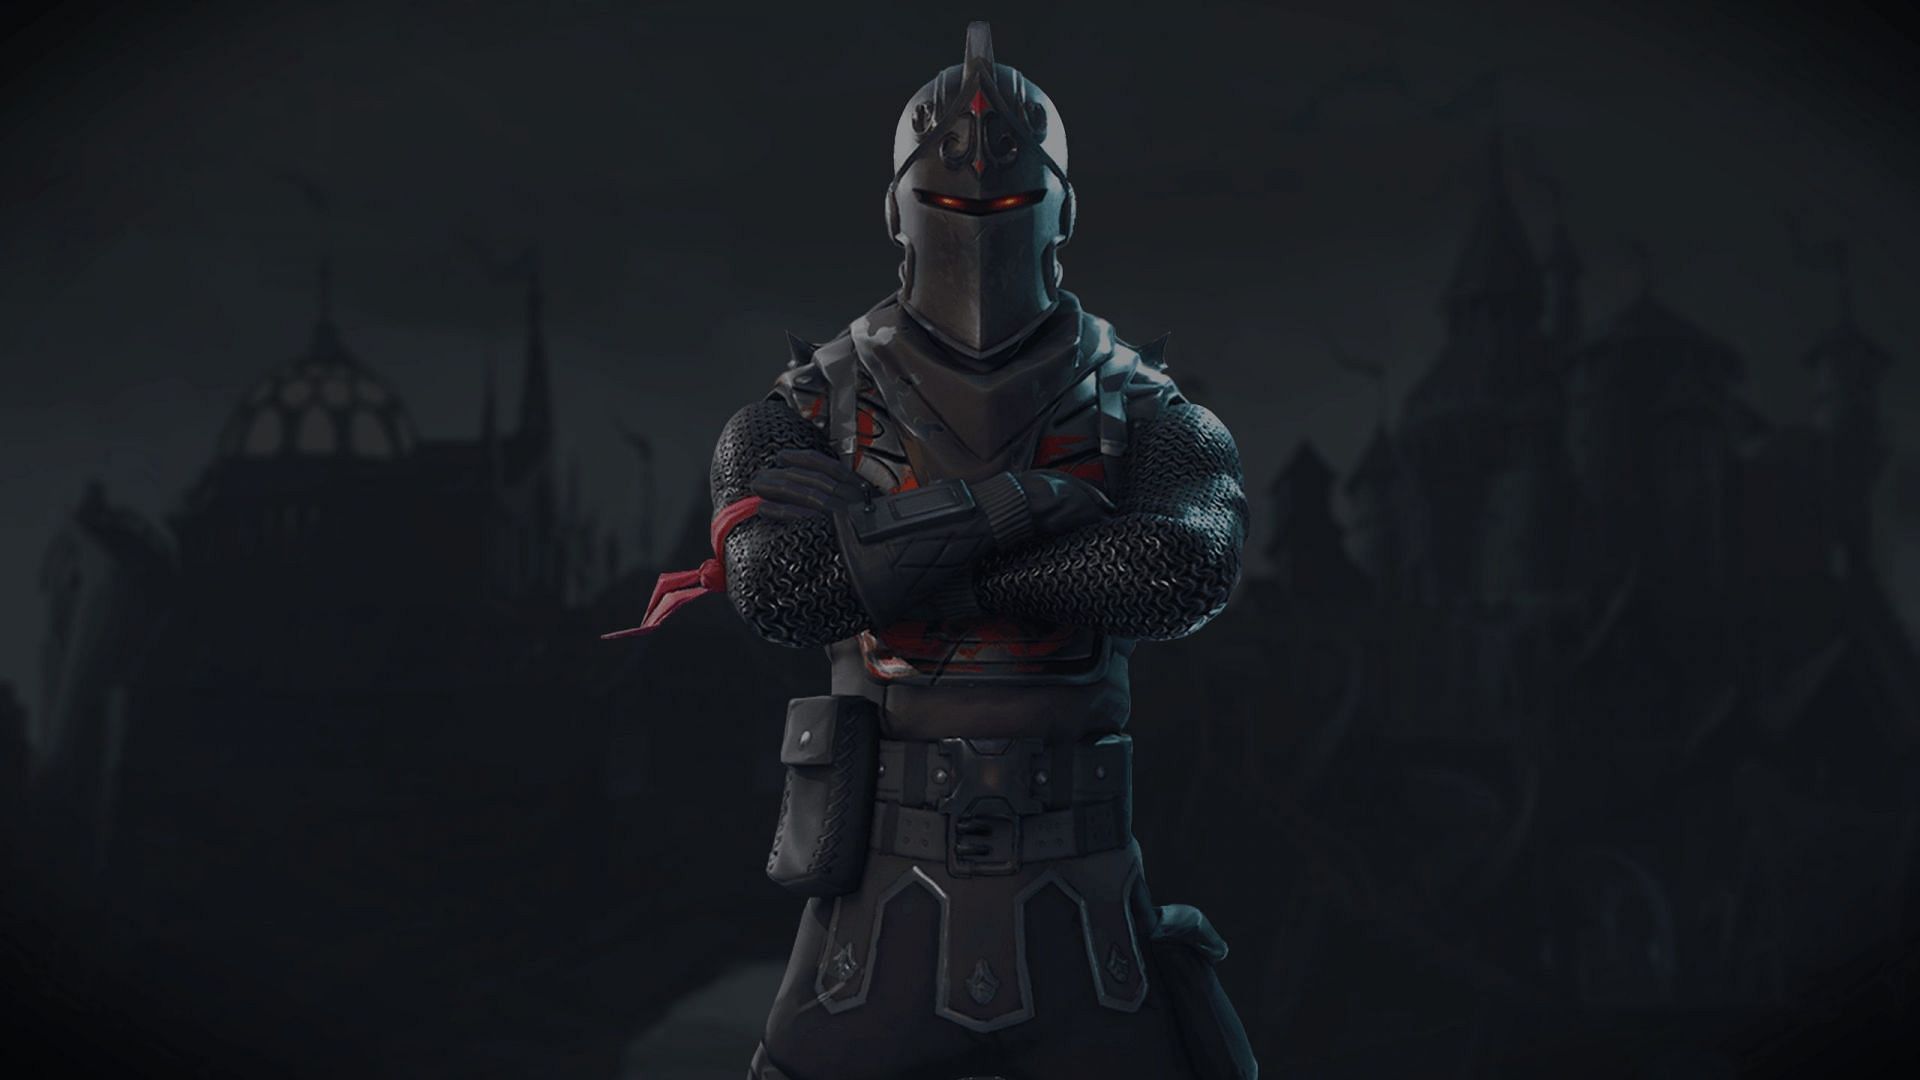 Black Knight is one of the most popular OG skins in the video game (Image via Epic Games)